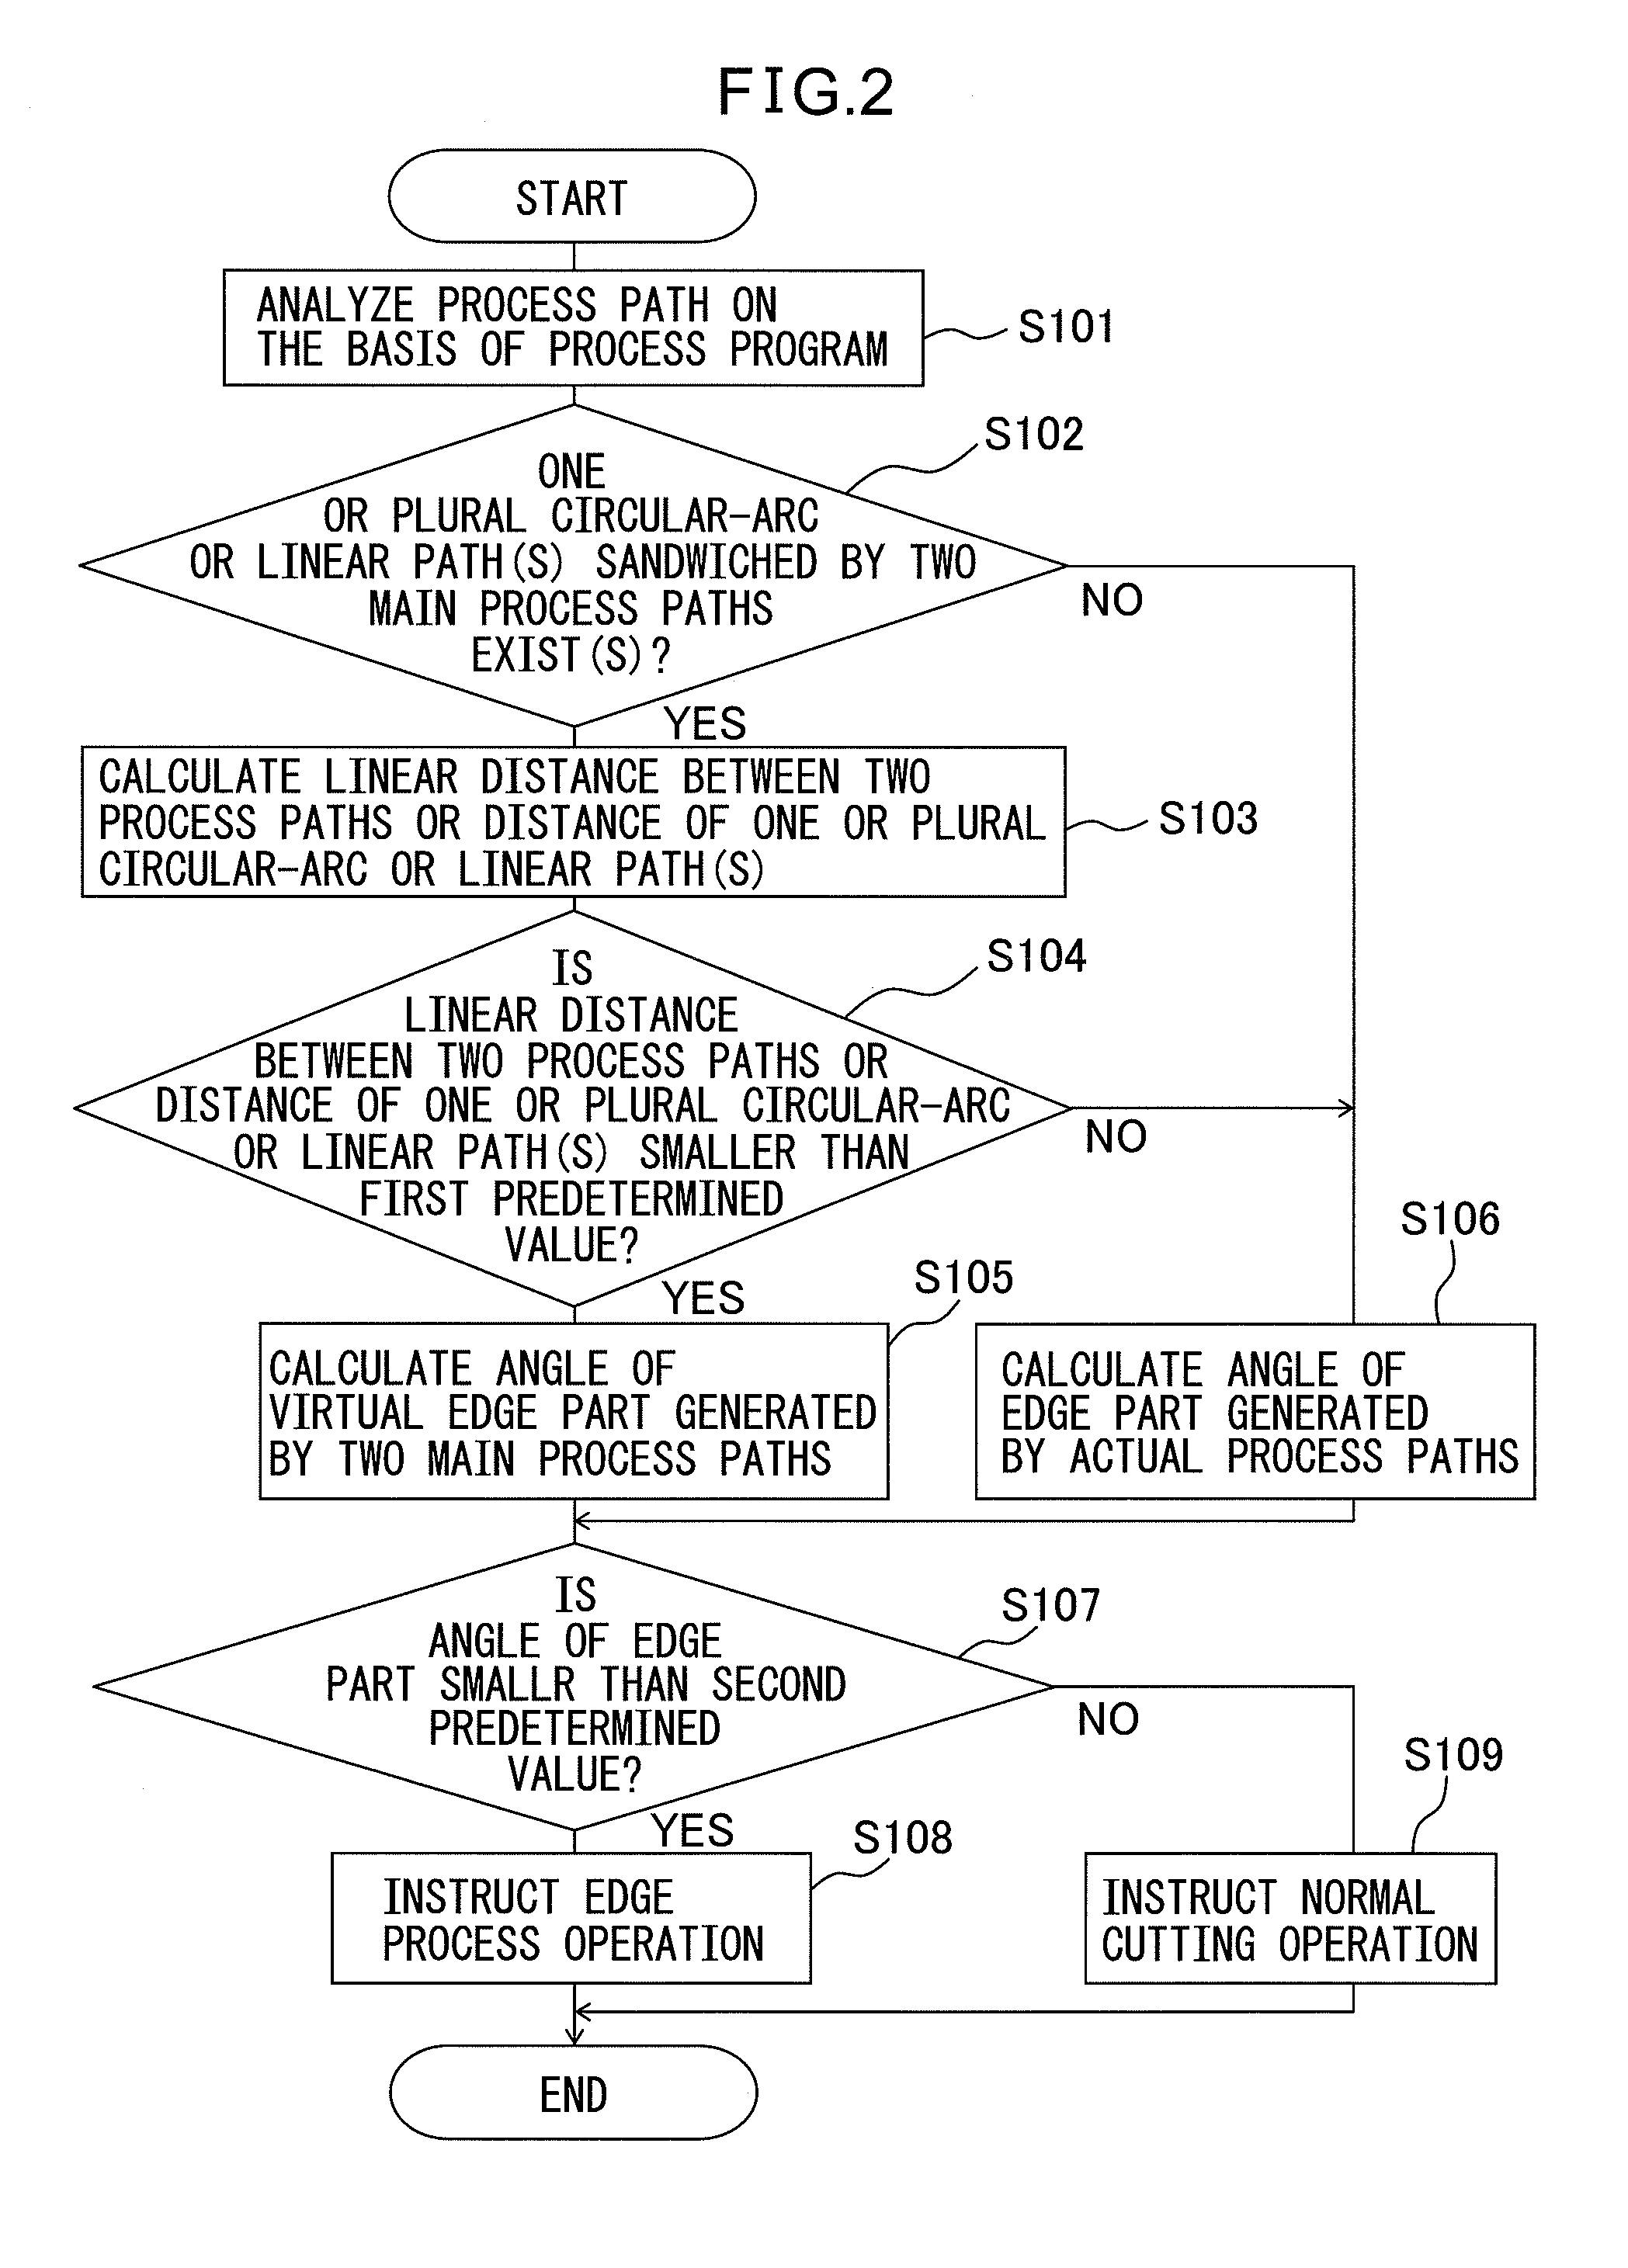 Controller for processing corner part in process path